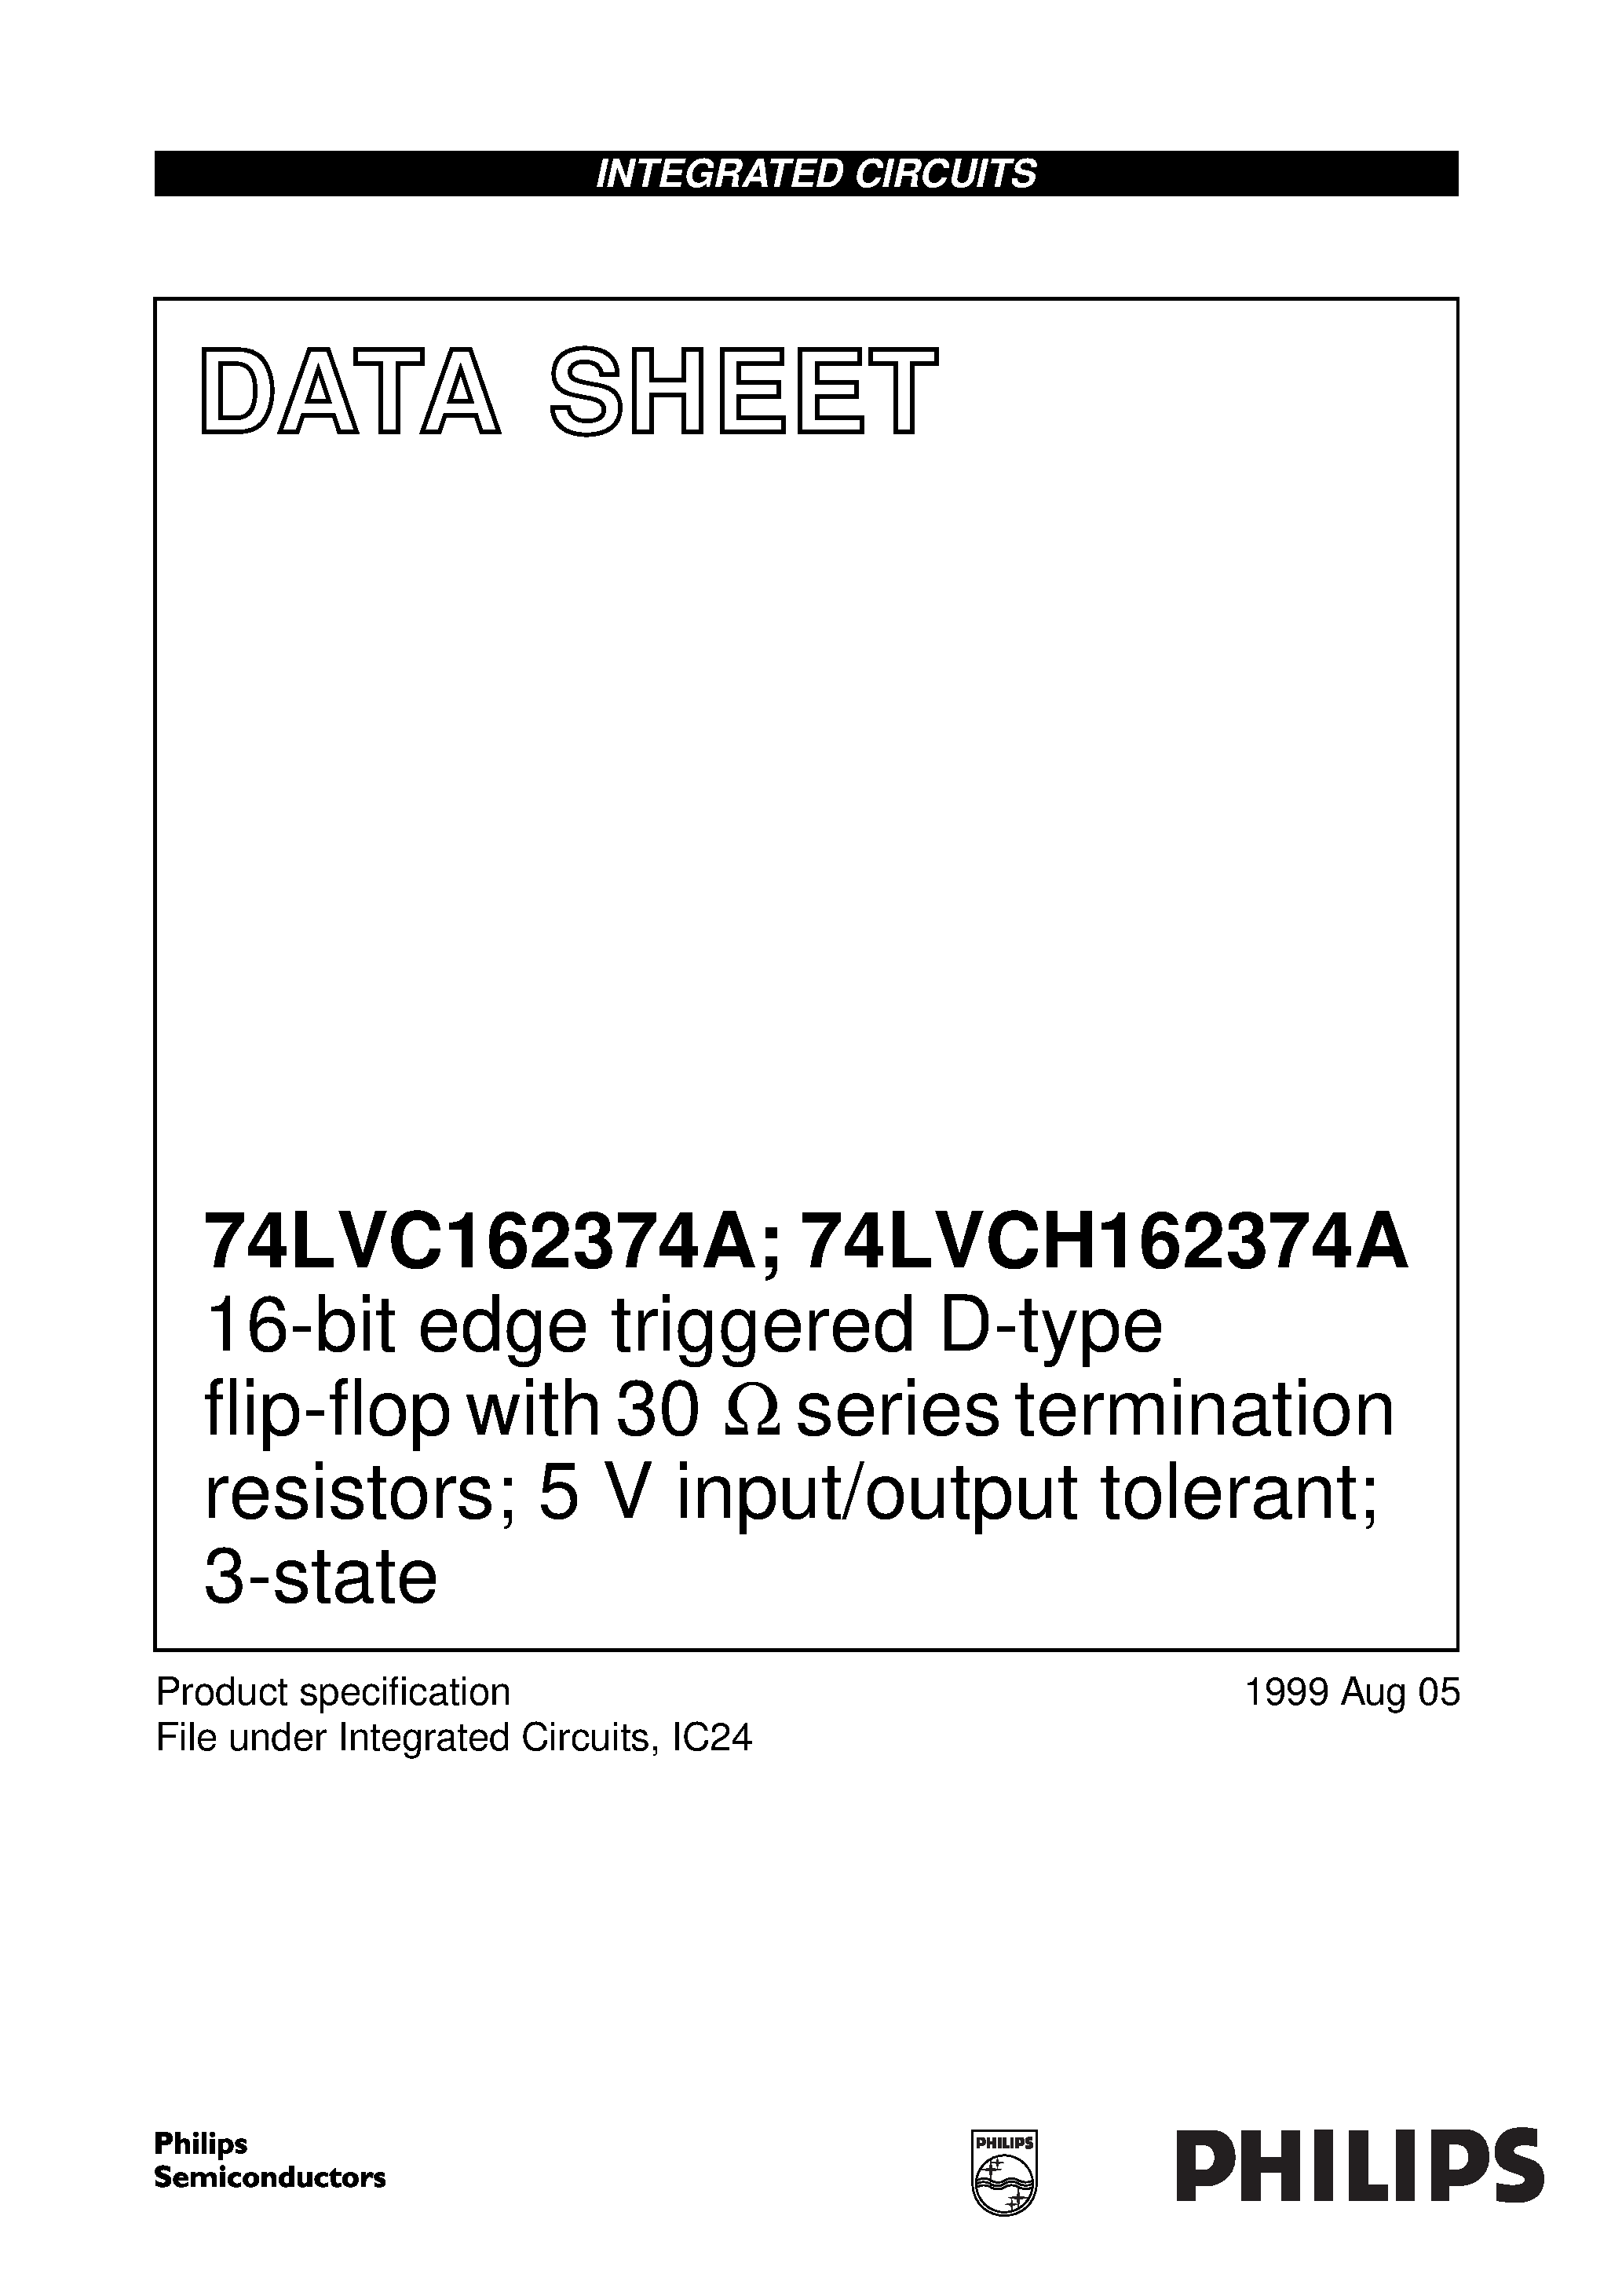 Datasheet VCH162374ADGG - 16-bit edge triggered D-type flip-flop with 30 ohmseries termination resistors; 5 V input/output tolerant; 3-state page 1